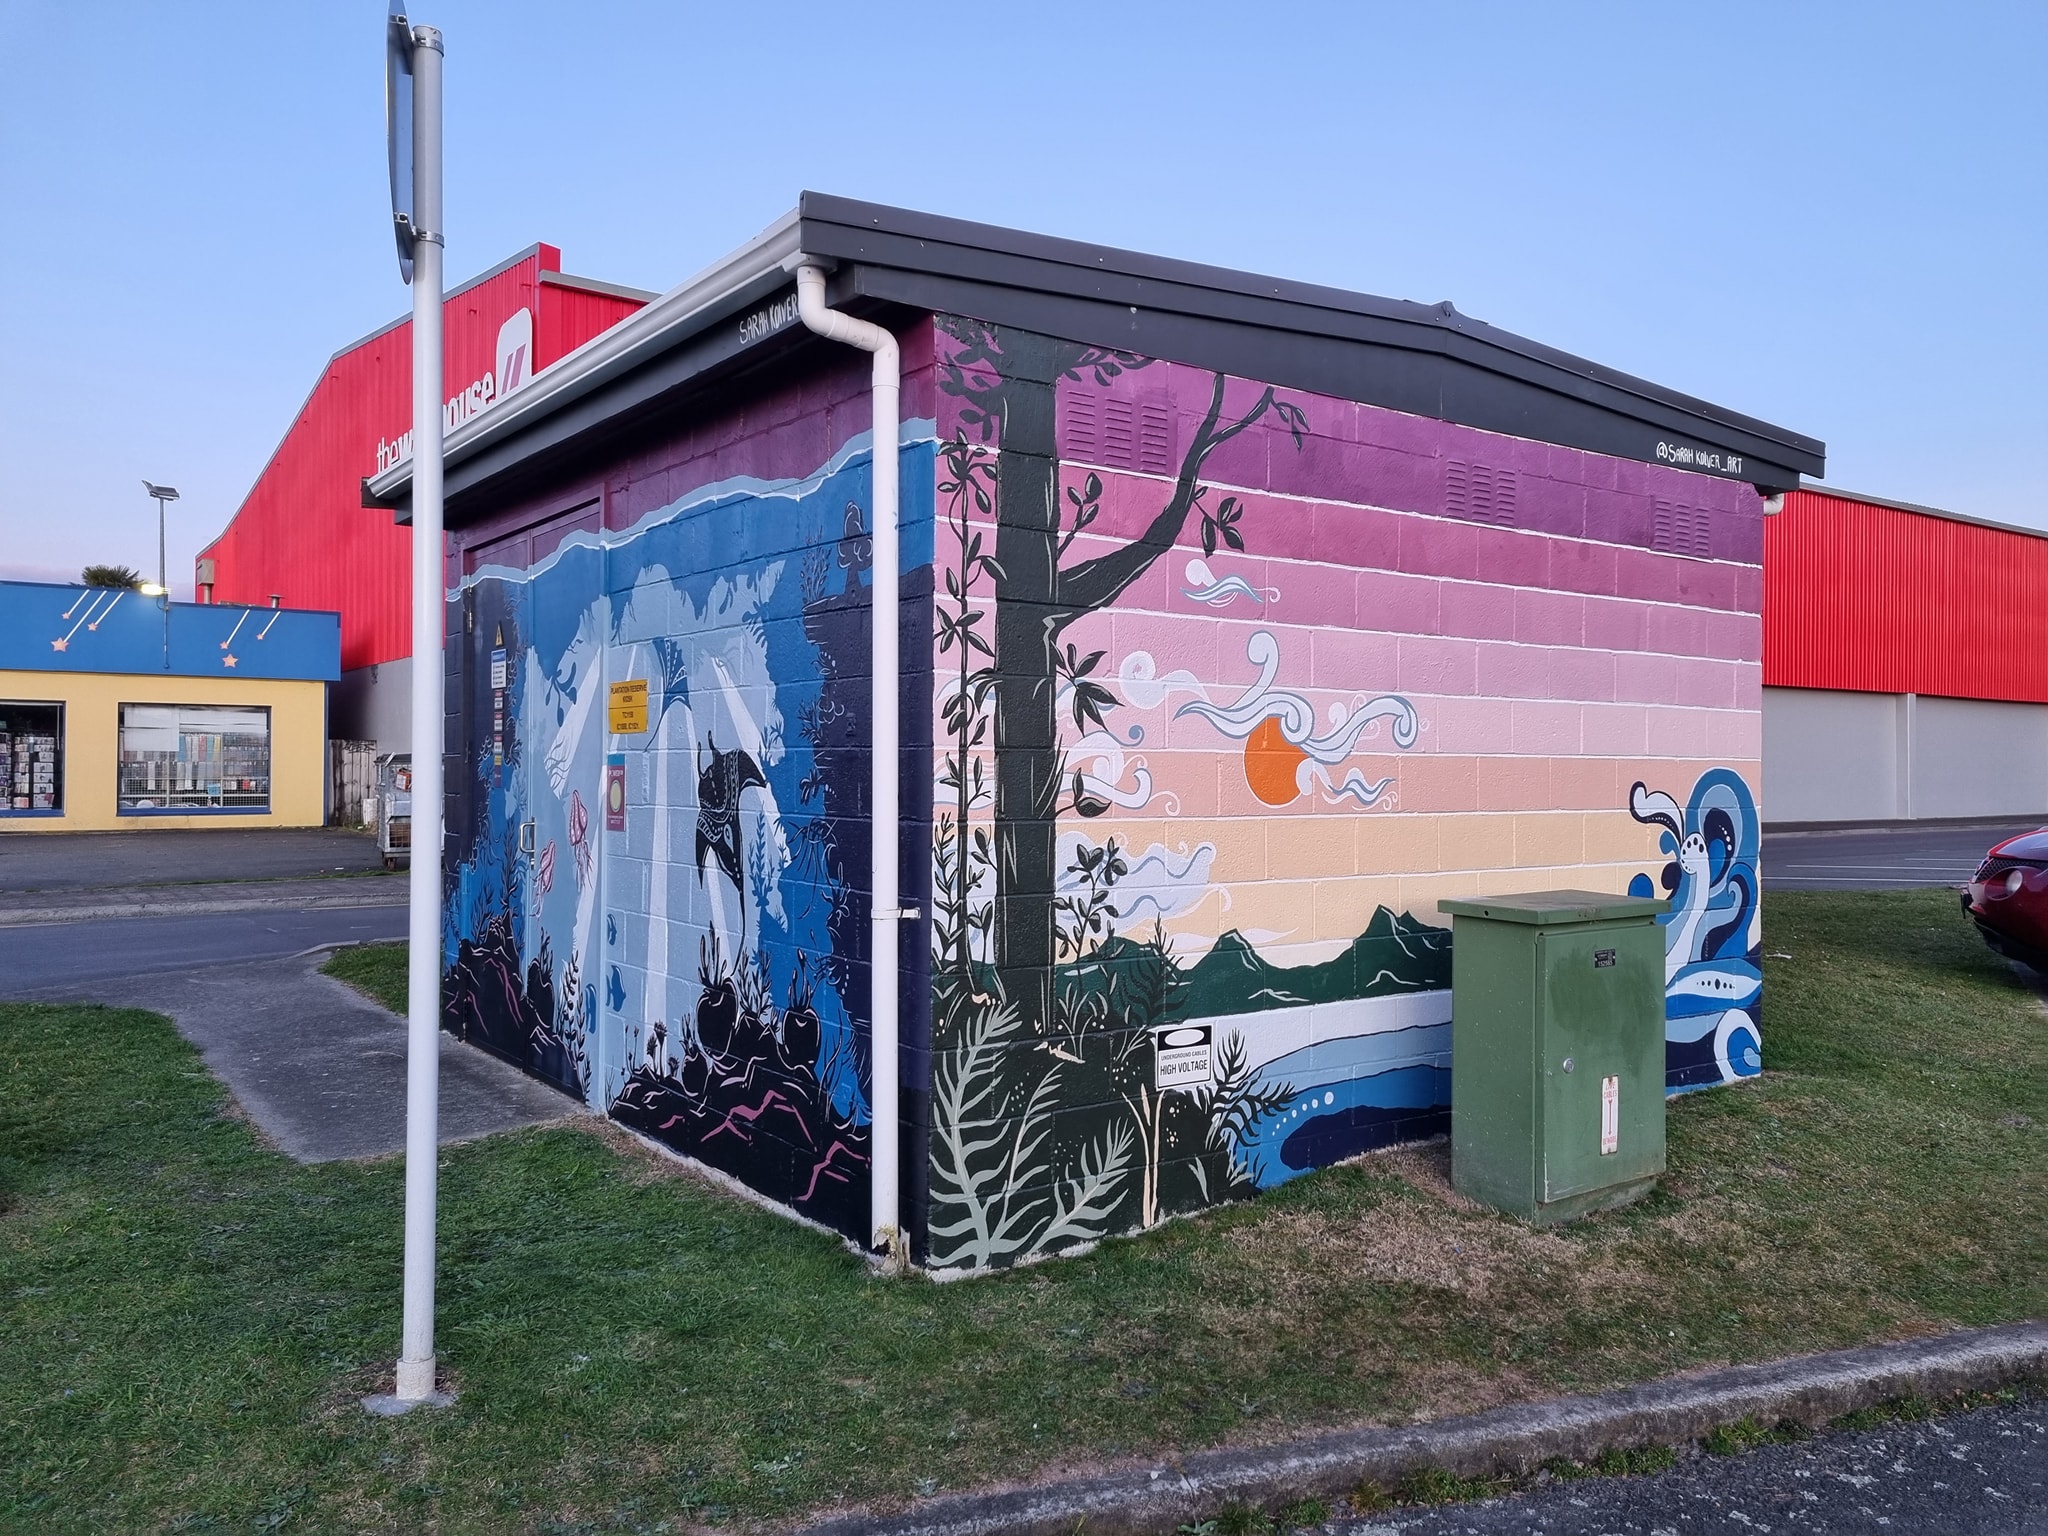 Two sides of a small concrete block building featuring a tropical scene mural.